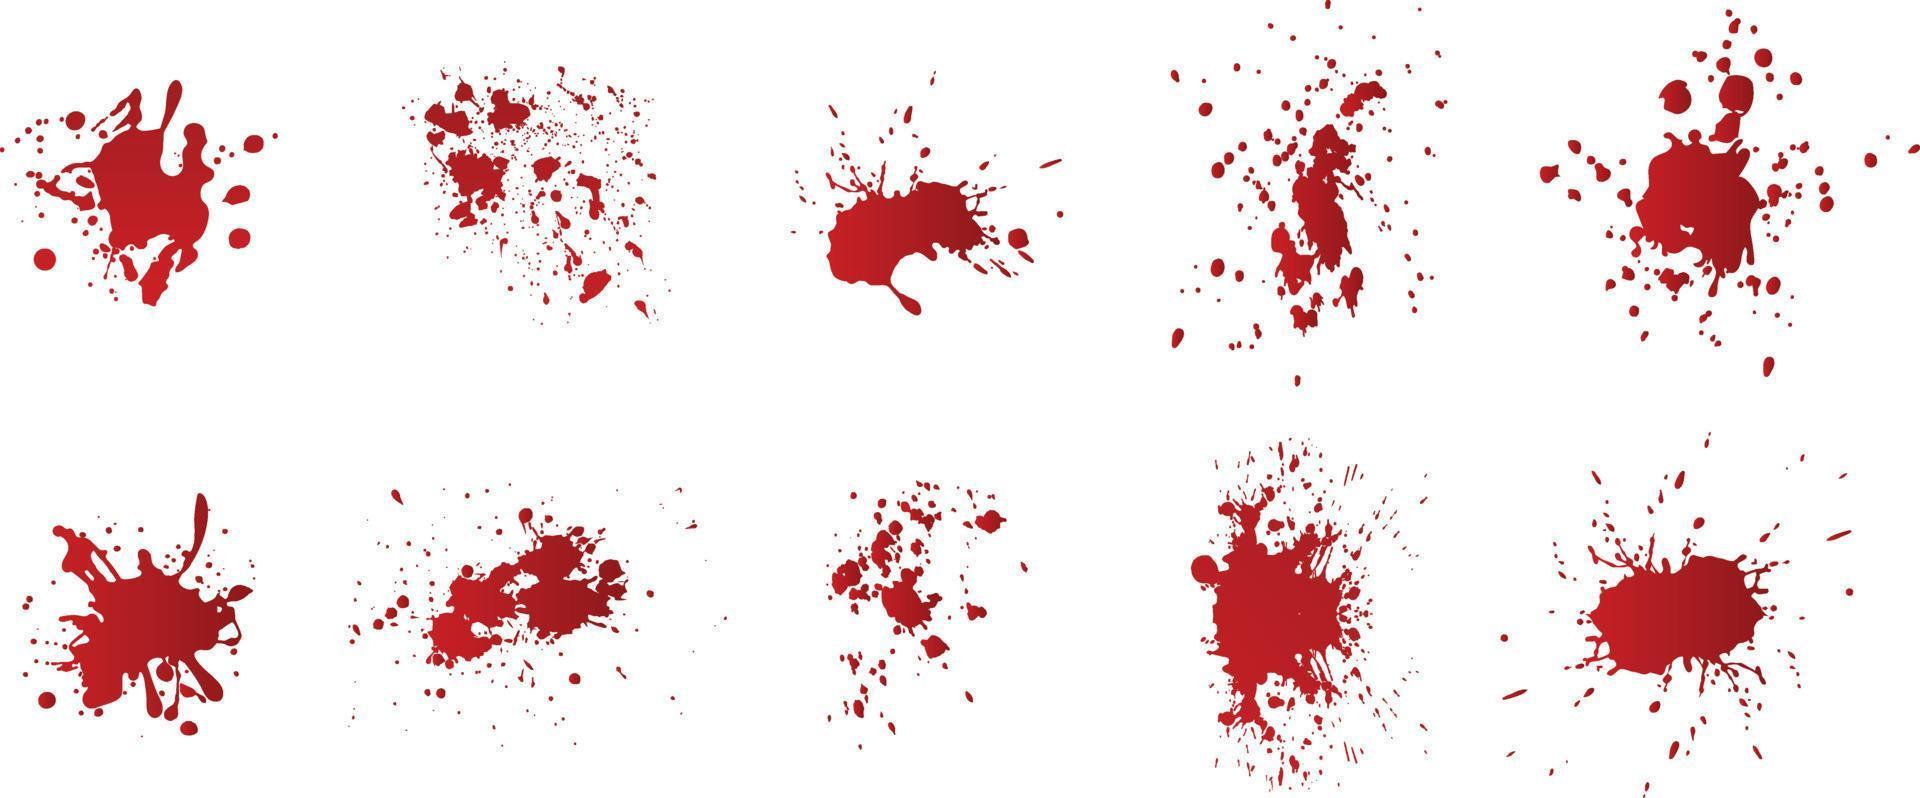 A collection of blood splats for artwork compositions and textures vector